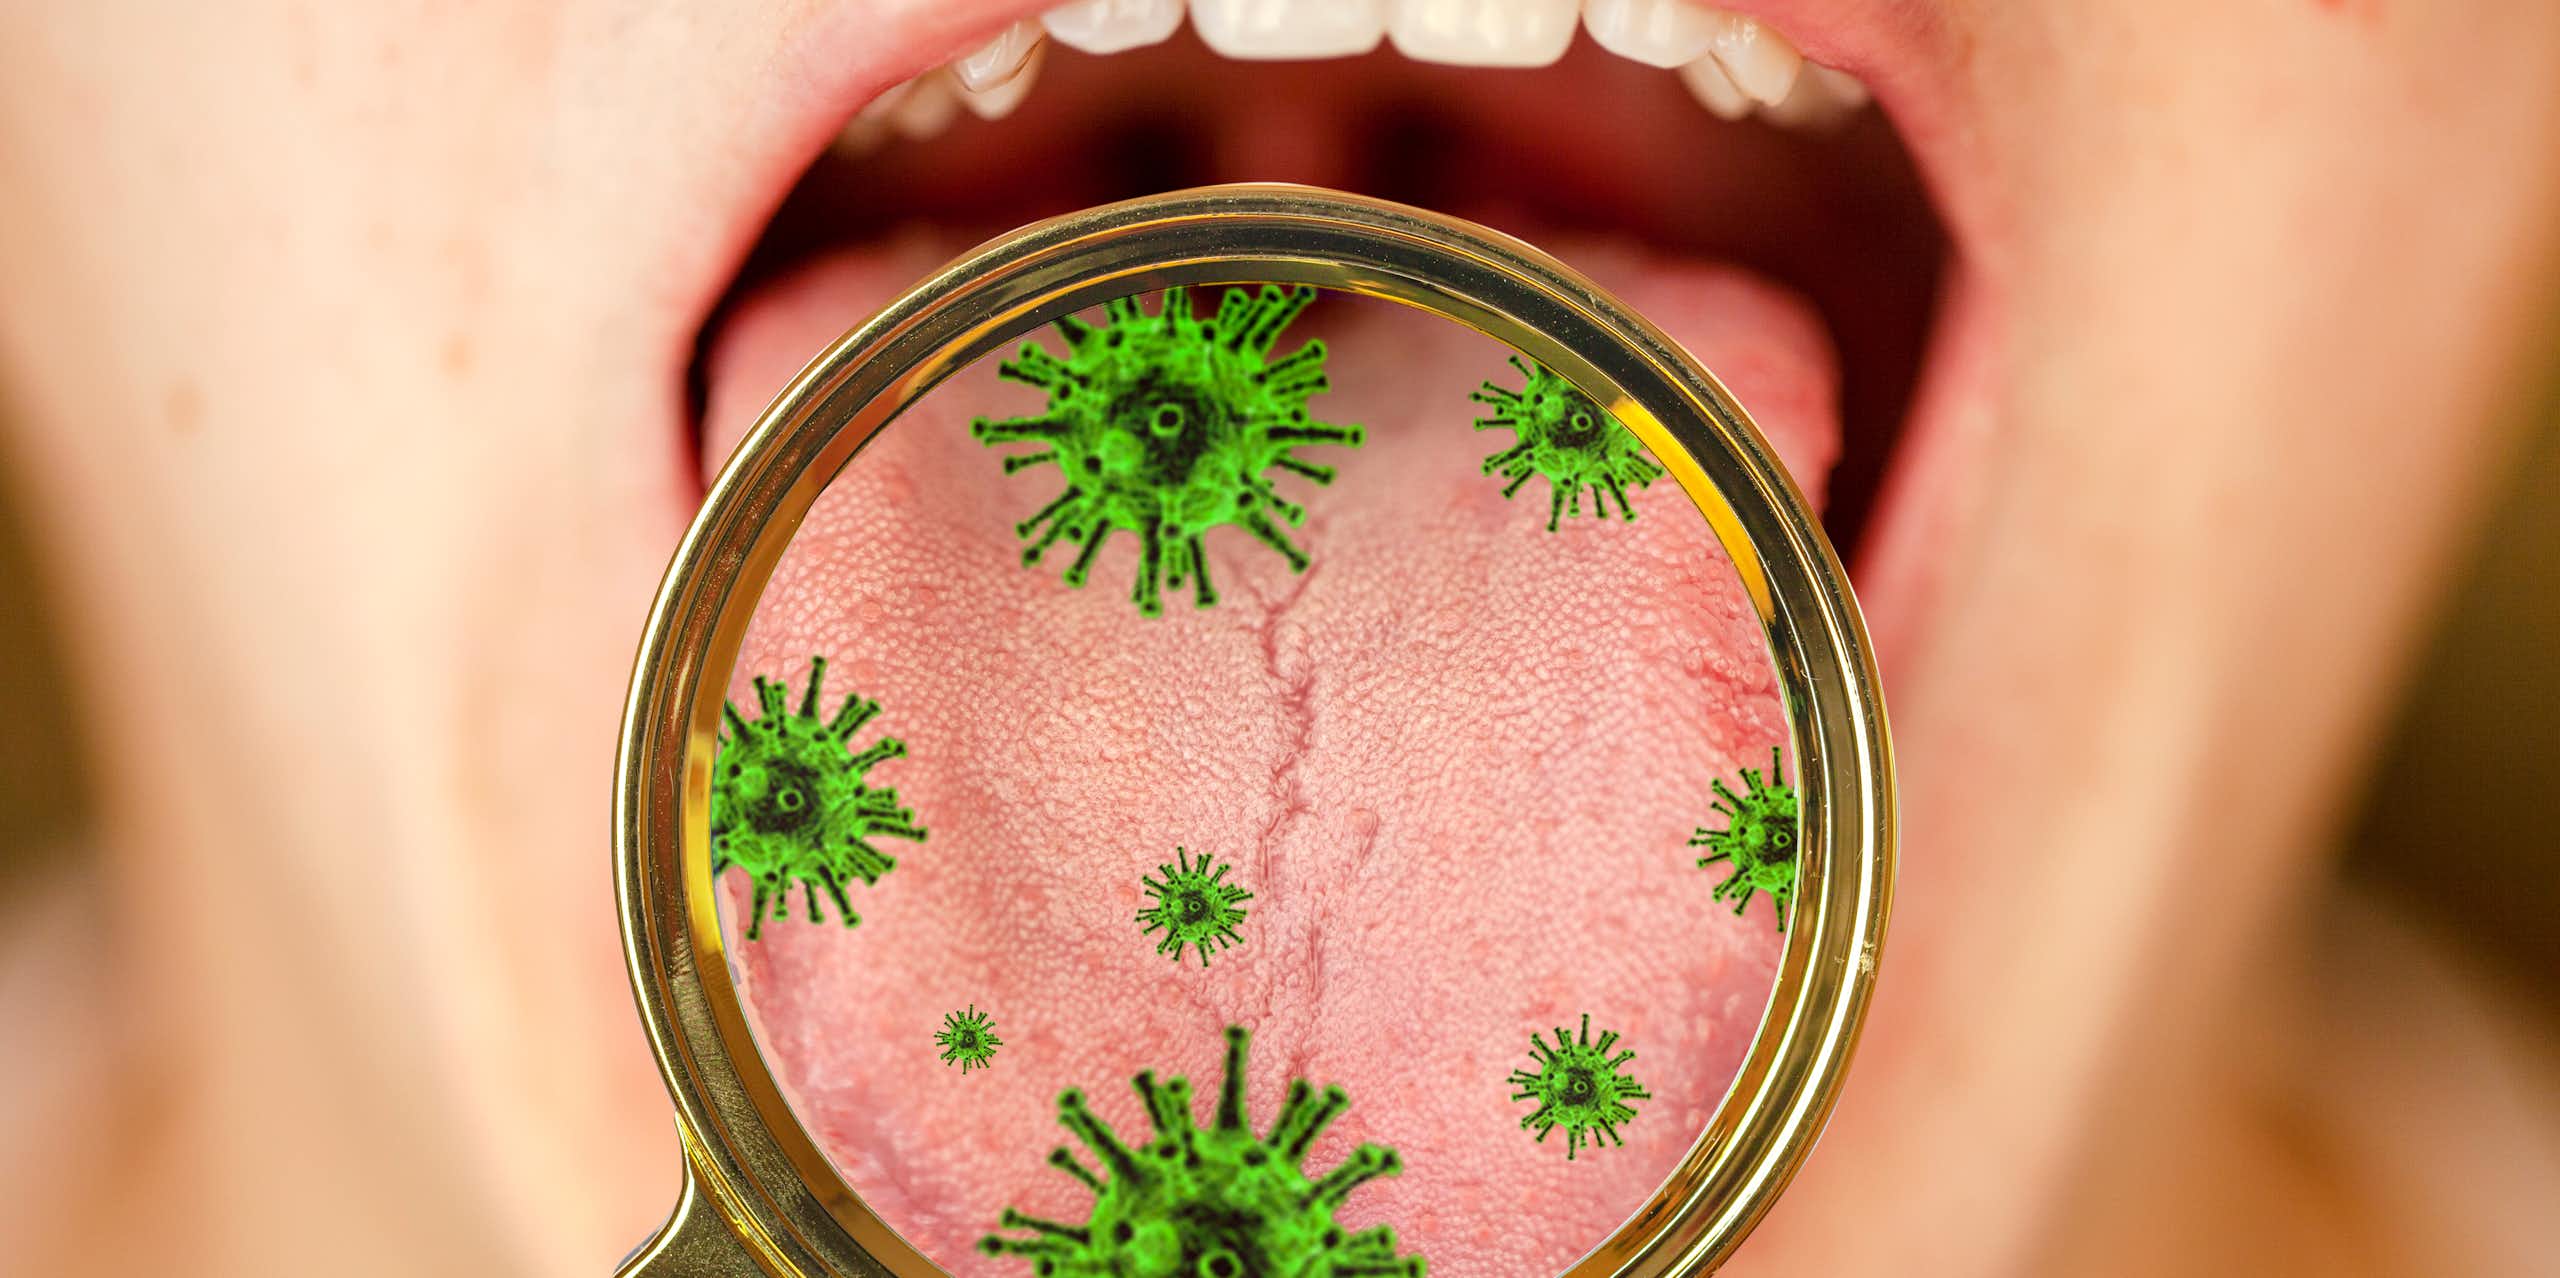 A person holds their mouth open, while a magnifying glass illustrates the bacteria found there.